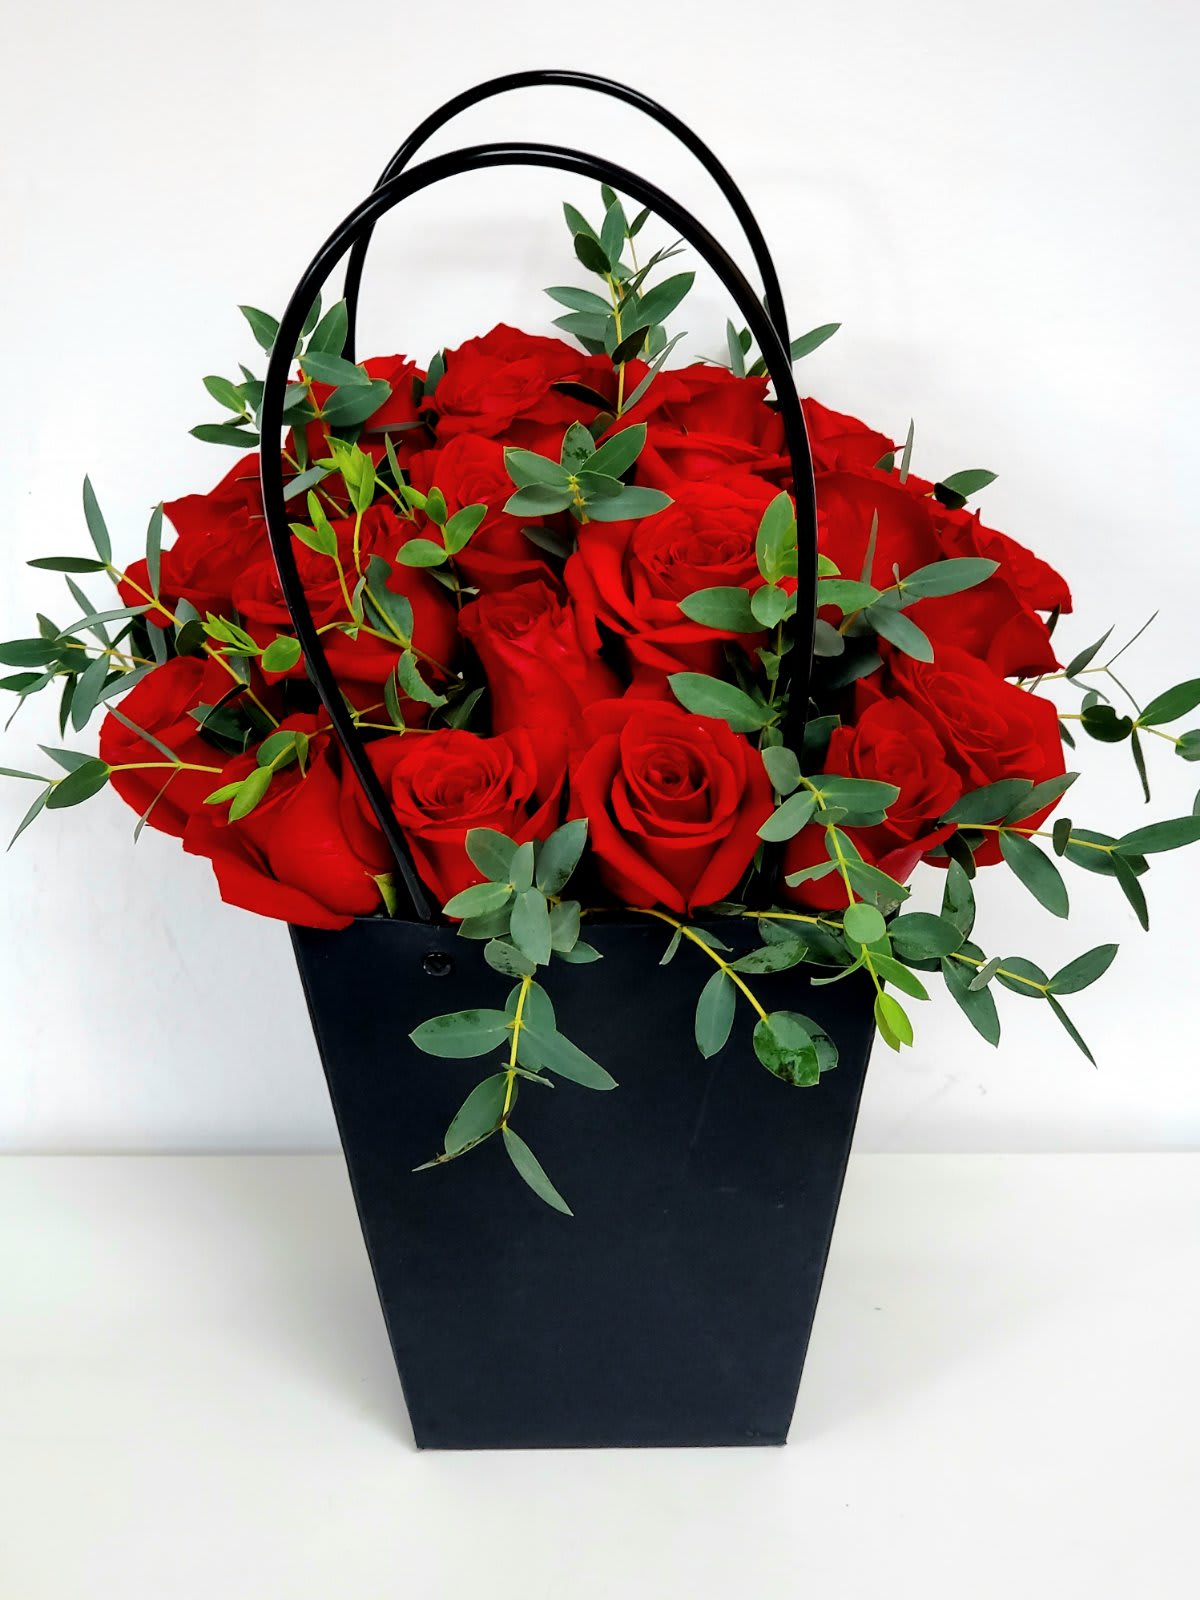 Red Roses in a Bag - Looking for eco-friendly arrangement?  Look no further.  The Red Roses in a Bag is perfect.  Simple yet Elegant and Luxurious made even more enchanting by the  dainty touches of parvifolia eucalyptus leaves. Want to make her proud? Send this unique bouquet any day...  20&quot;H by 15&quot;W  